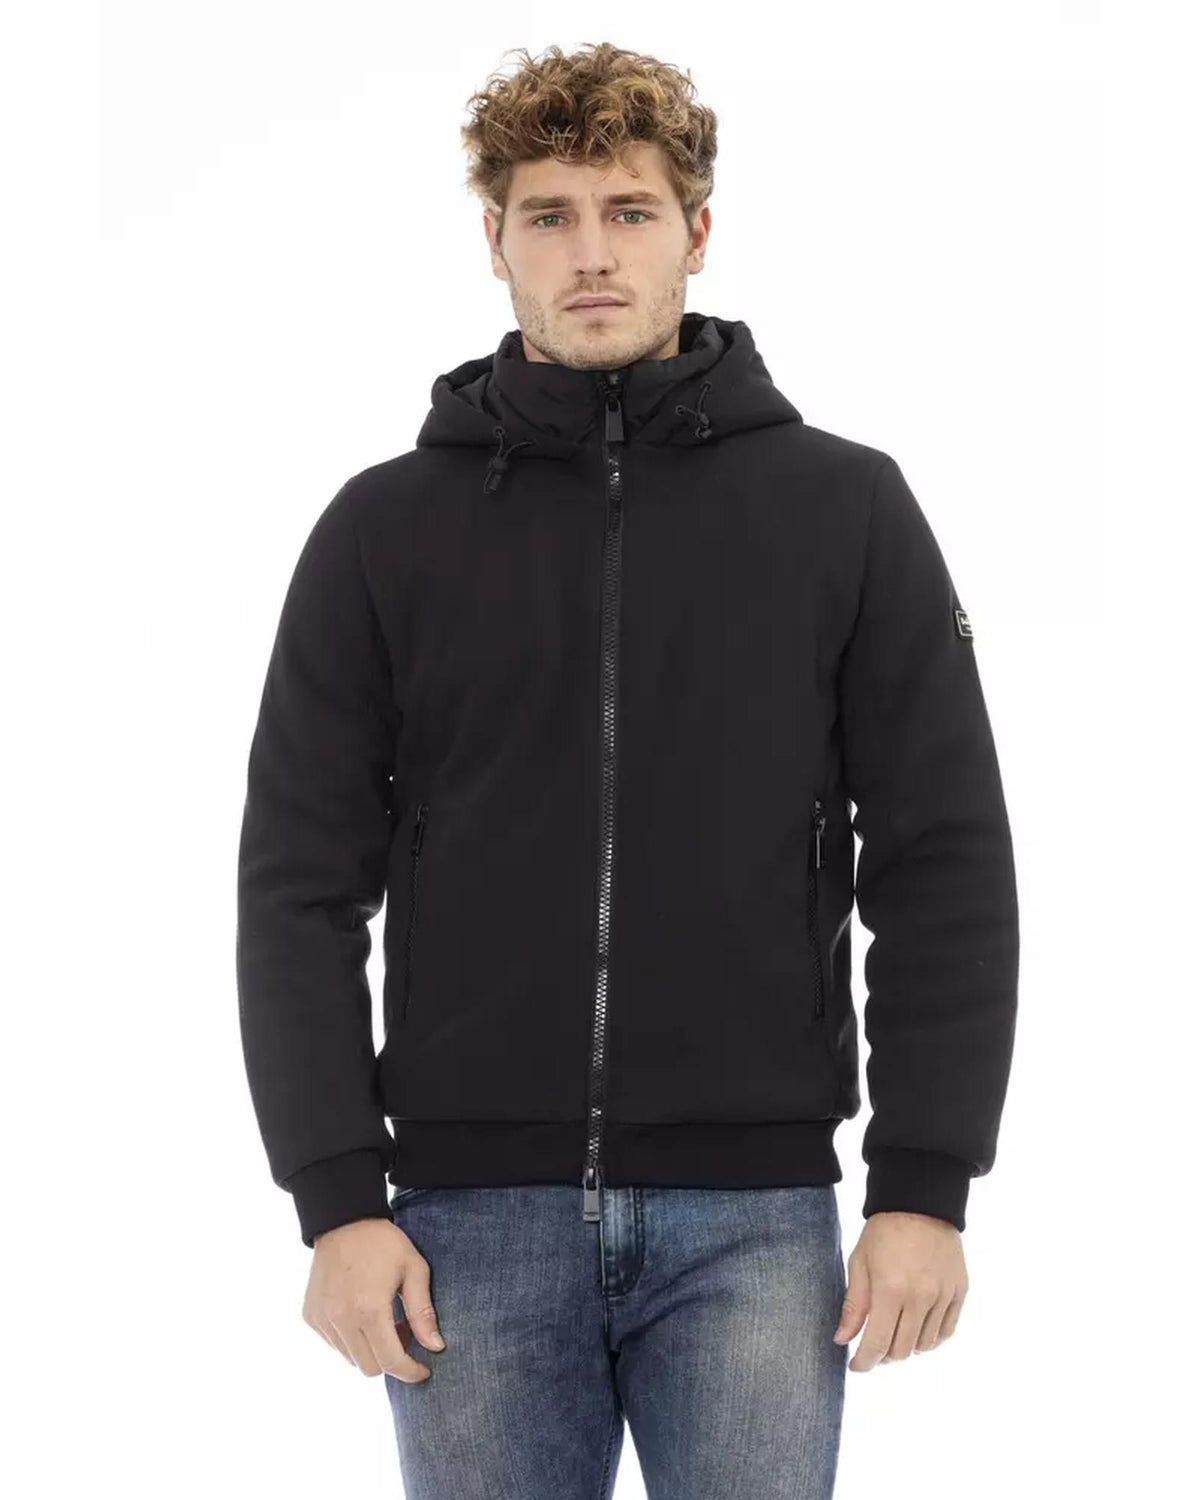 Threaded Pocket Jacket with Double Breasted Closure L Men